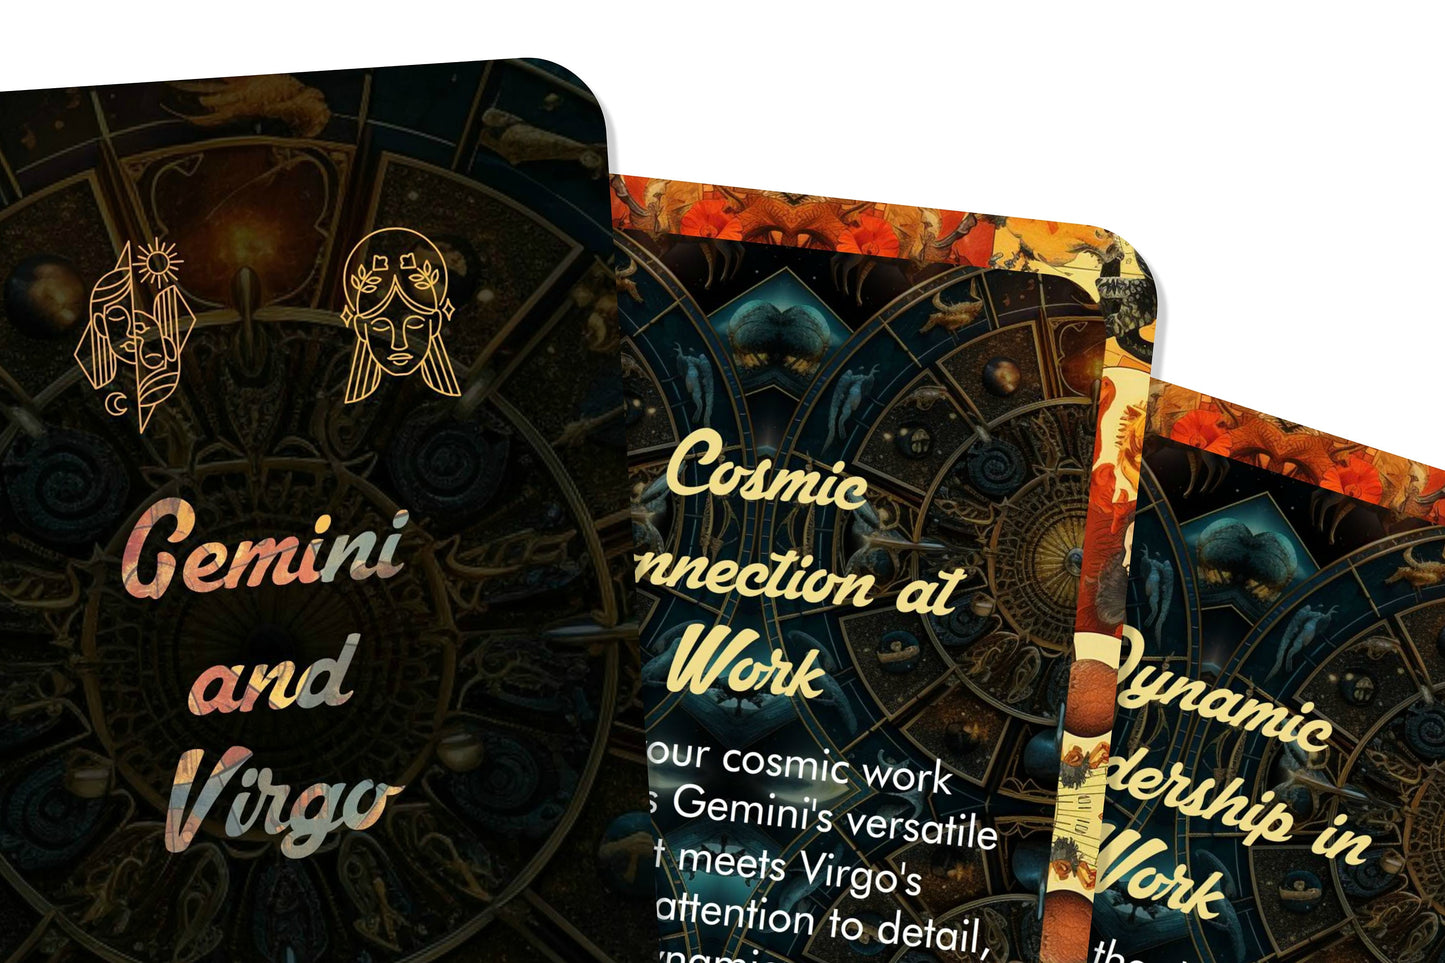 Gemini and Virgo - Zodiac Compatibility - Divination tools - Oracle cards - Star Sign Compatibility - Horoscope Compatibility Cards